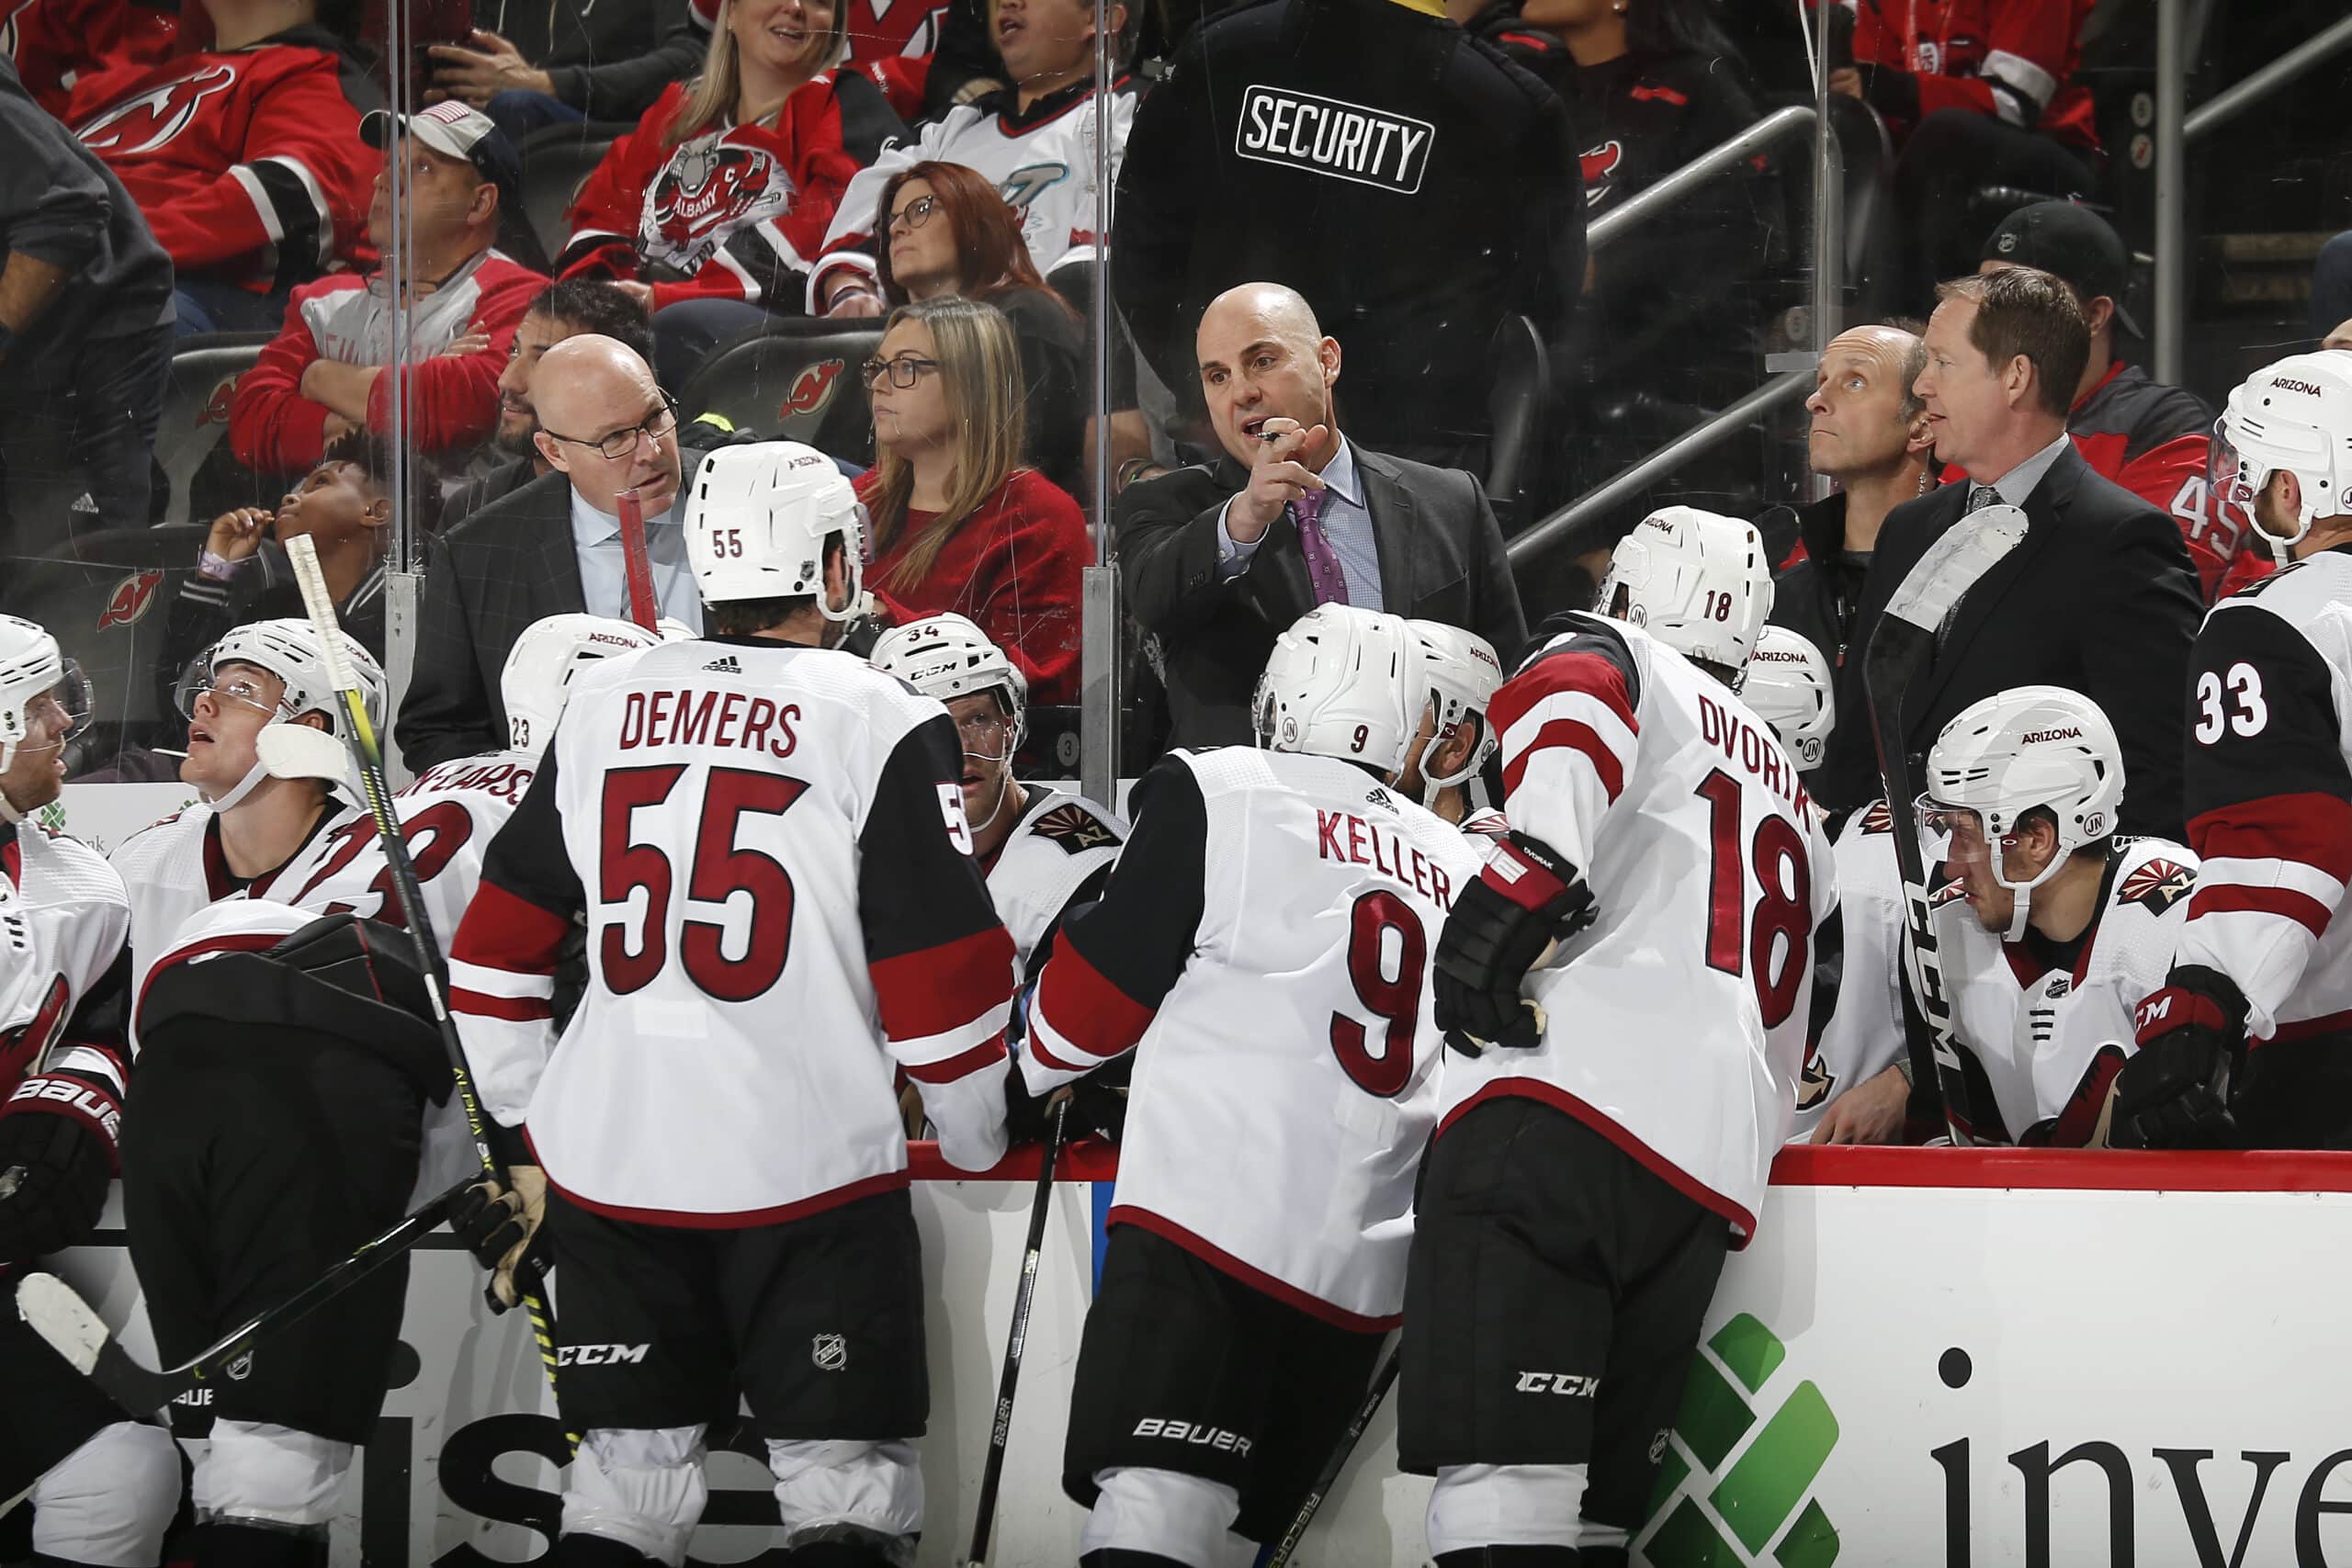 NEWARK,NJ - OCTOBER 25: Rich Tocchet Head Coach of the Arizona Coyotes gives instructions to his team during the game against the New Jersey Devils at the Prudential Center on October 25, 2019 in Newark, New Jersey. The Coyotes defeated the Devils 5-3. (Photo by Andy Marlin/NHLI via Getty Images)